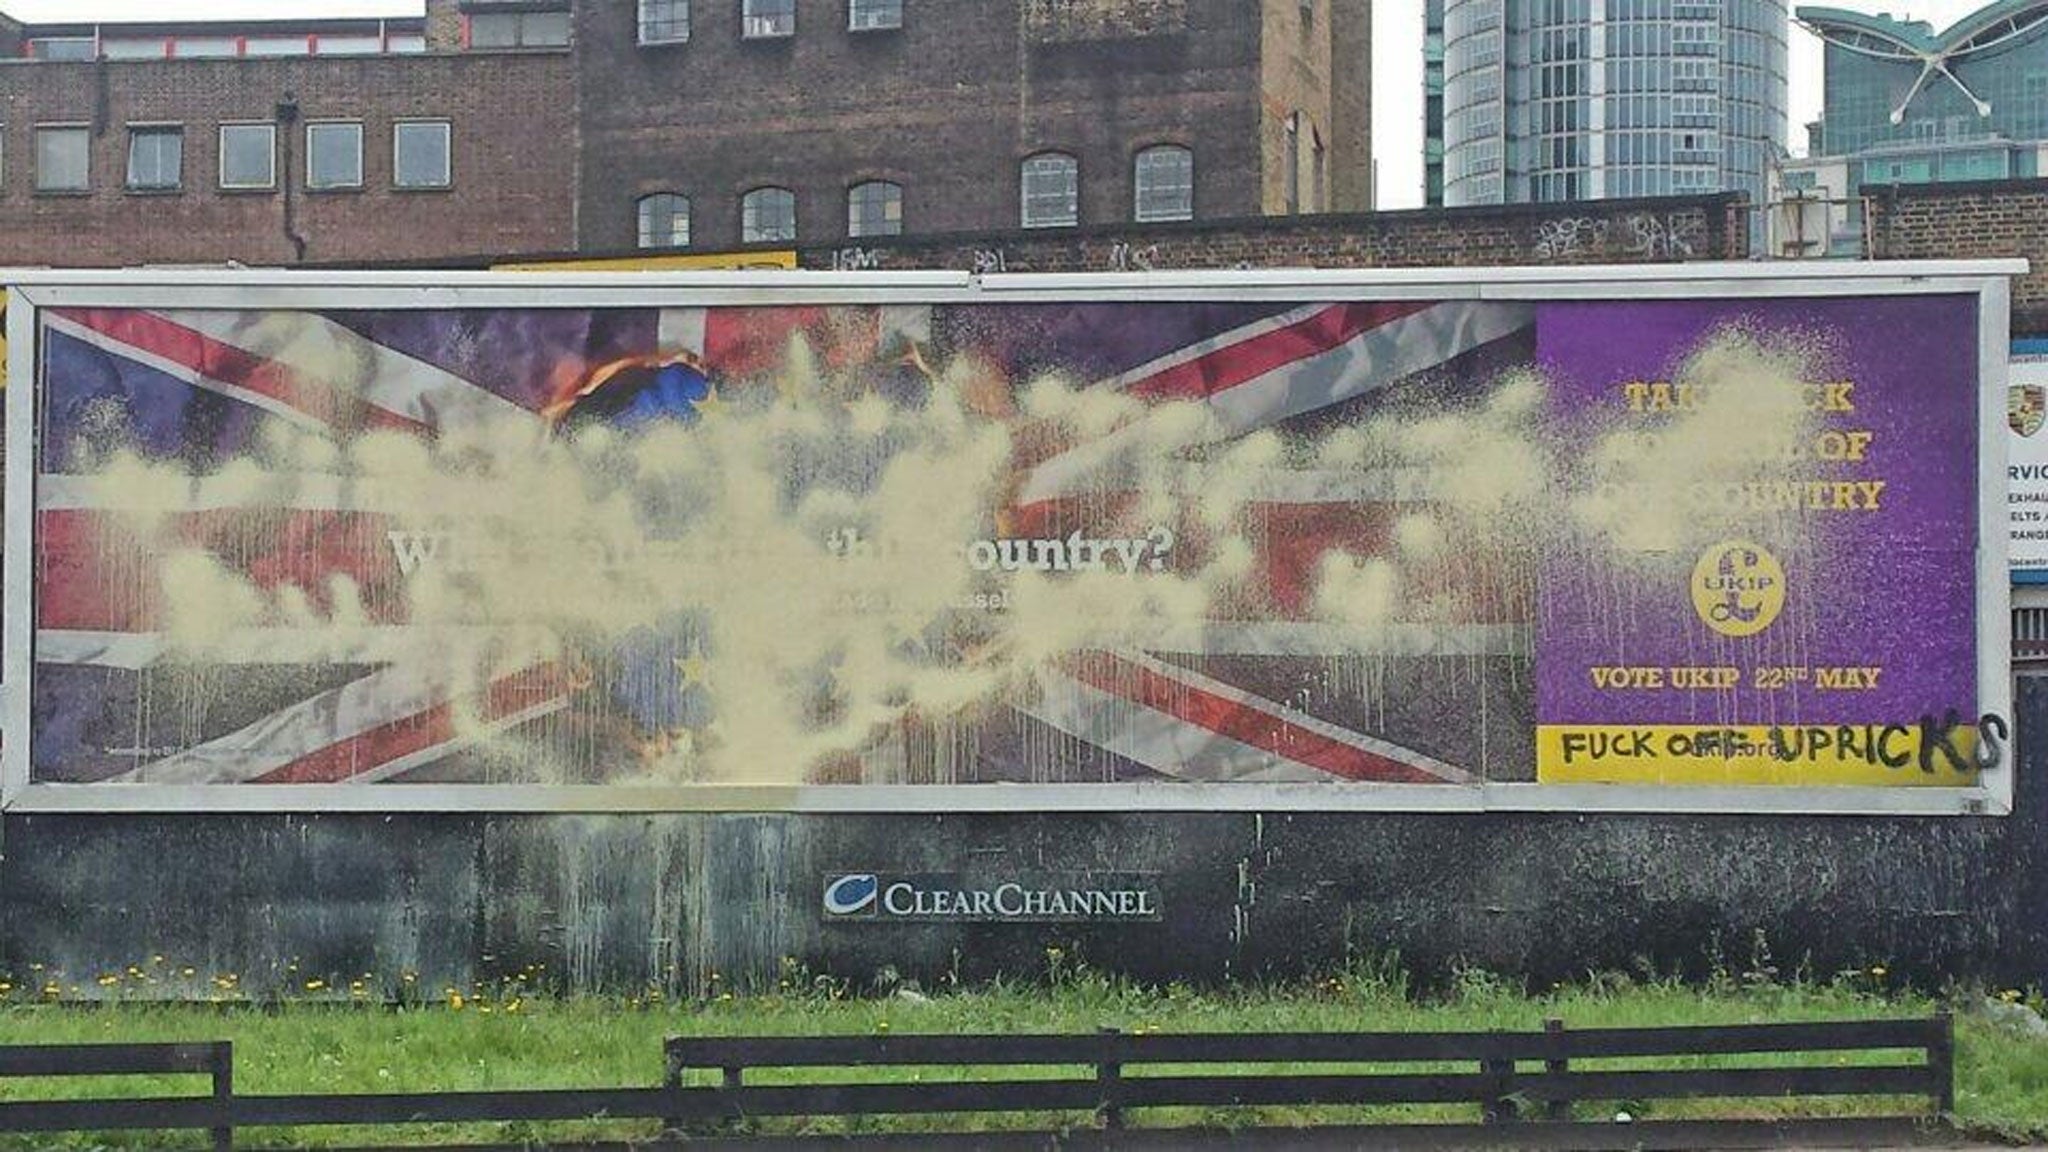 Users on Twitter shared this image showing the Ukip poster near Vauxhall station in south London, where it has been selectively altered